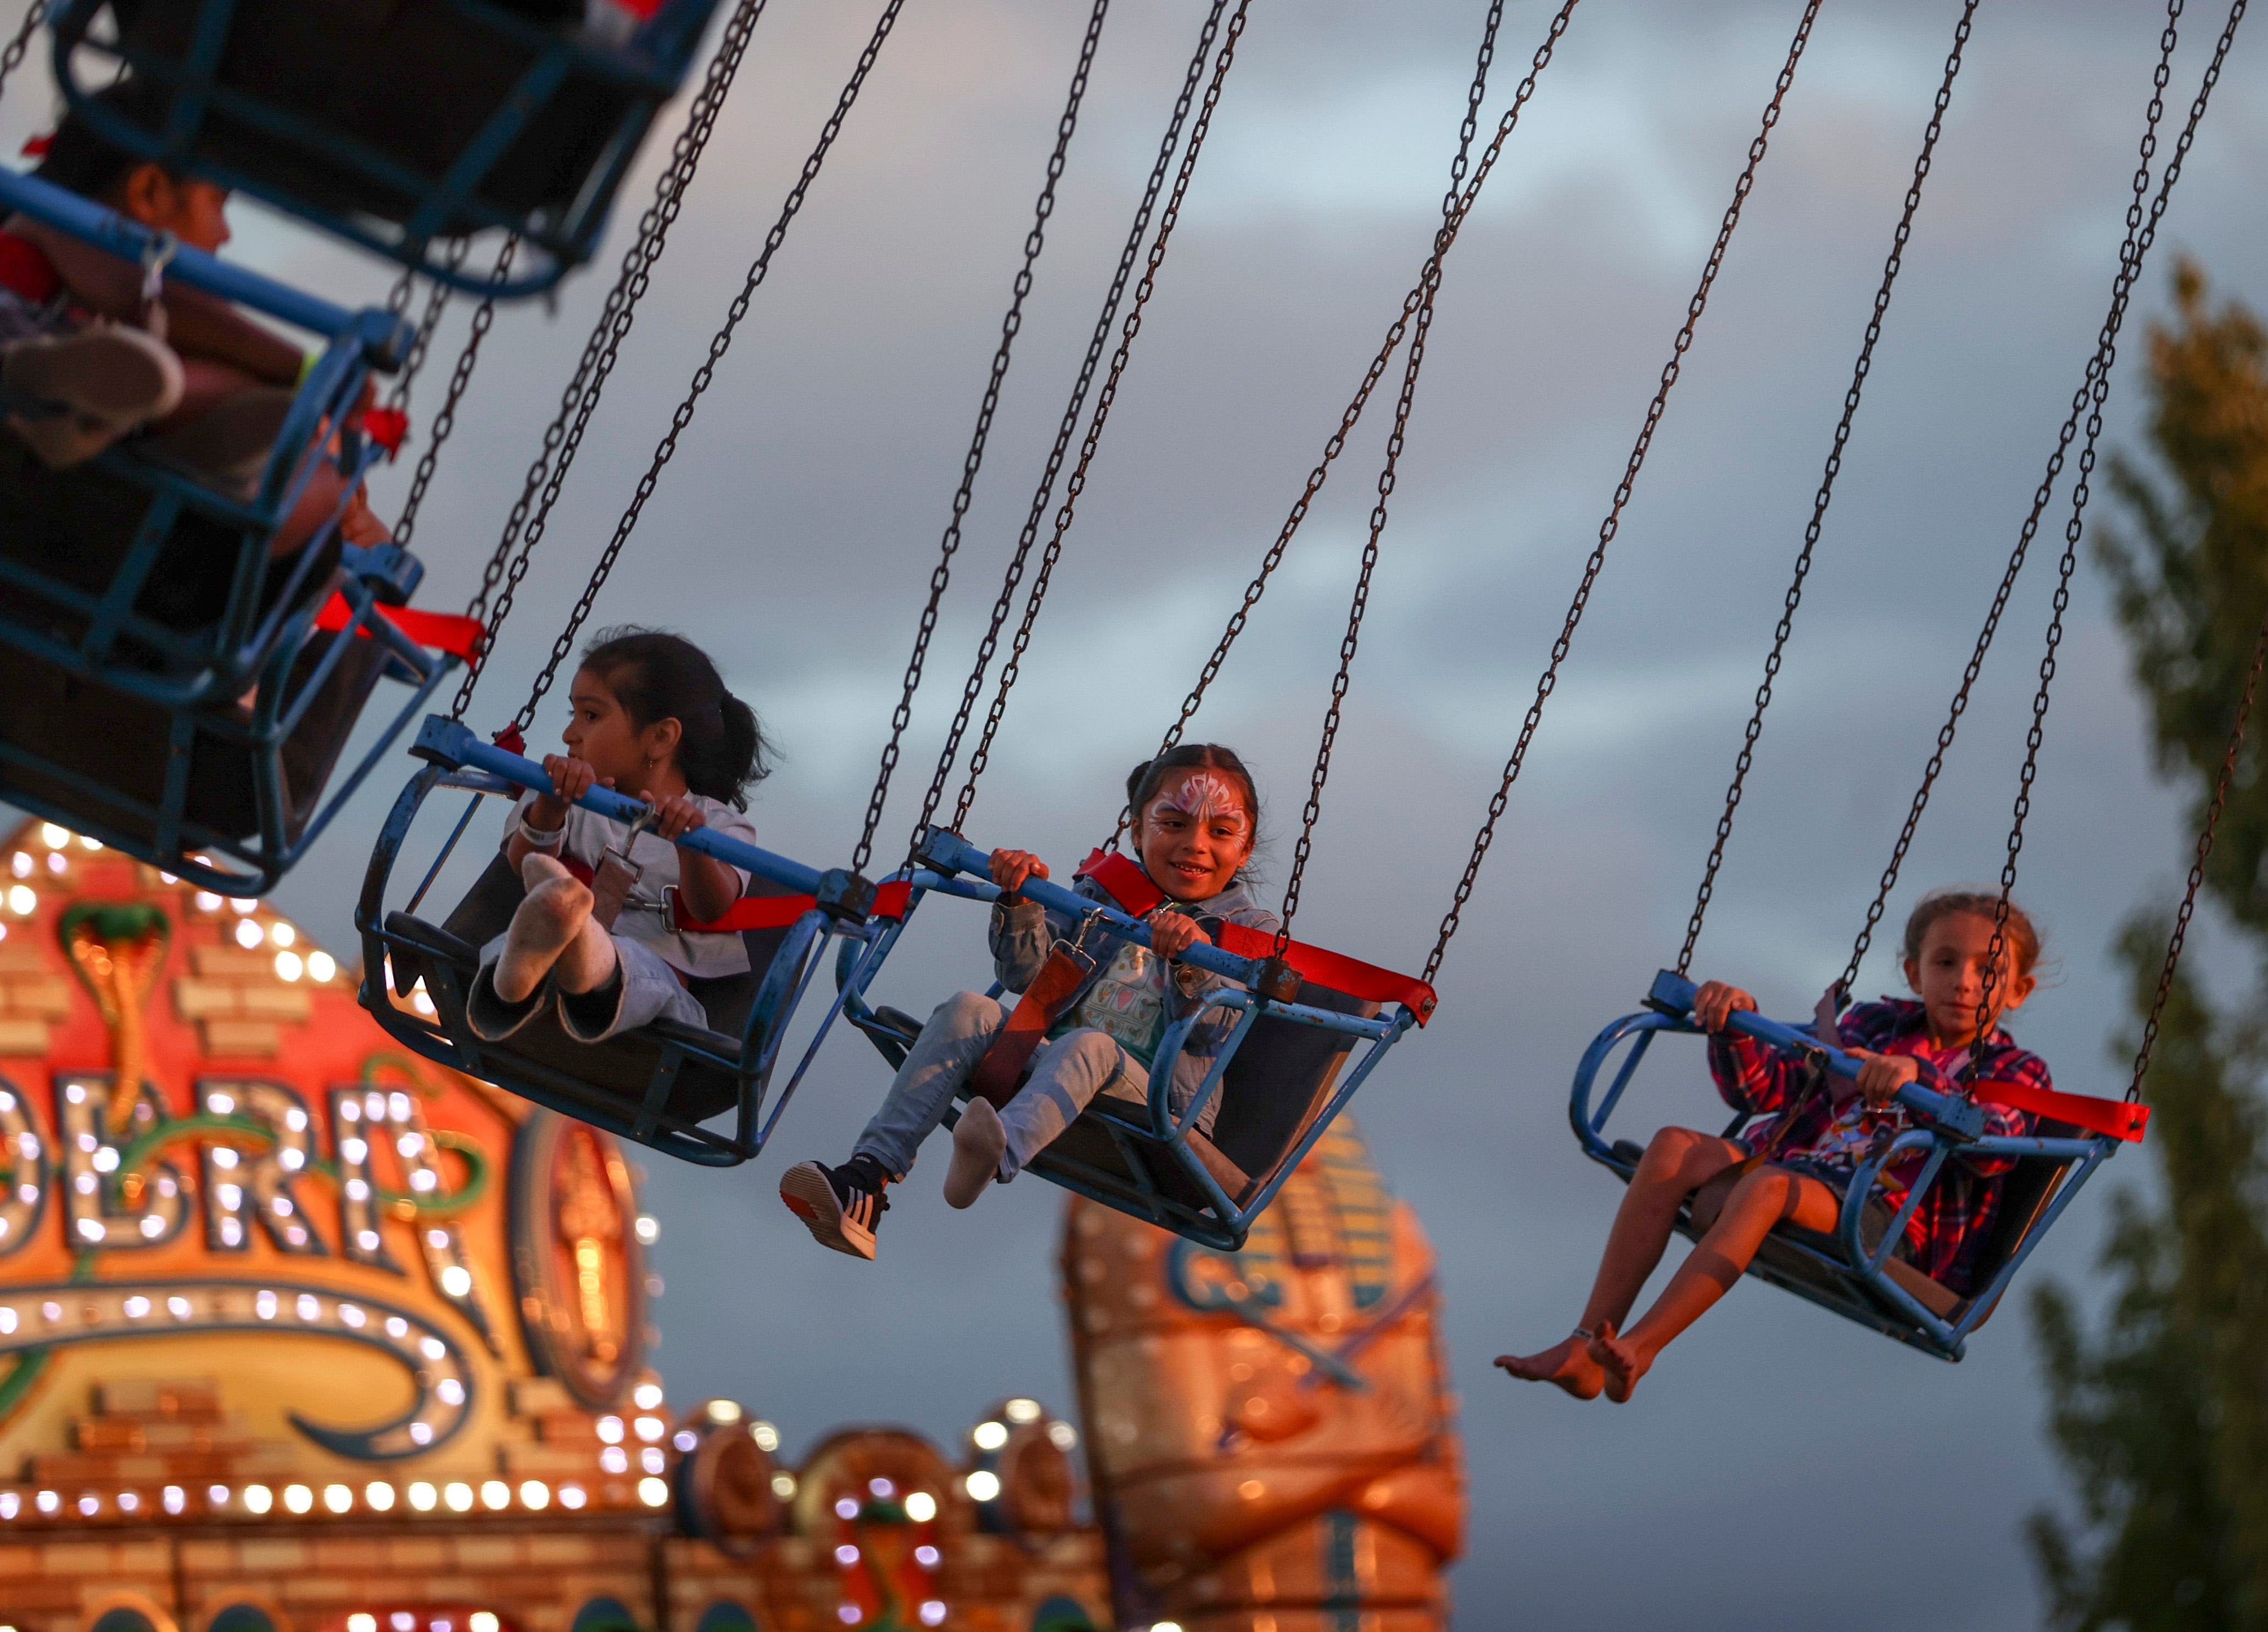 Oregon State Fair tickets are discounted 60% for 24 hours